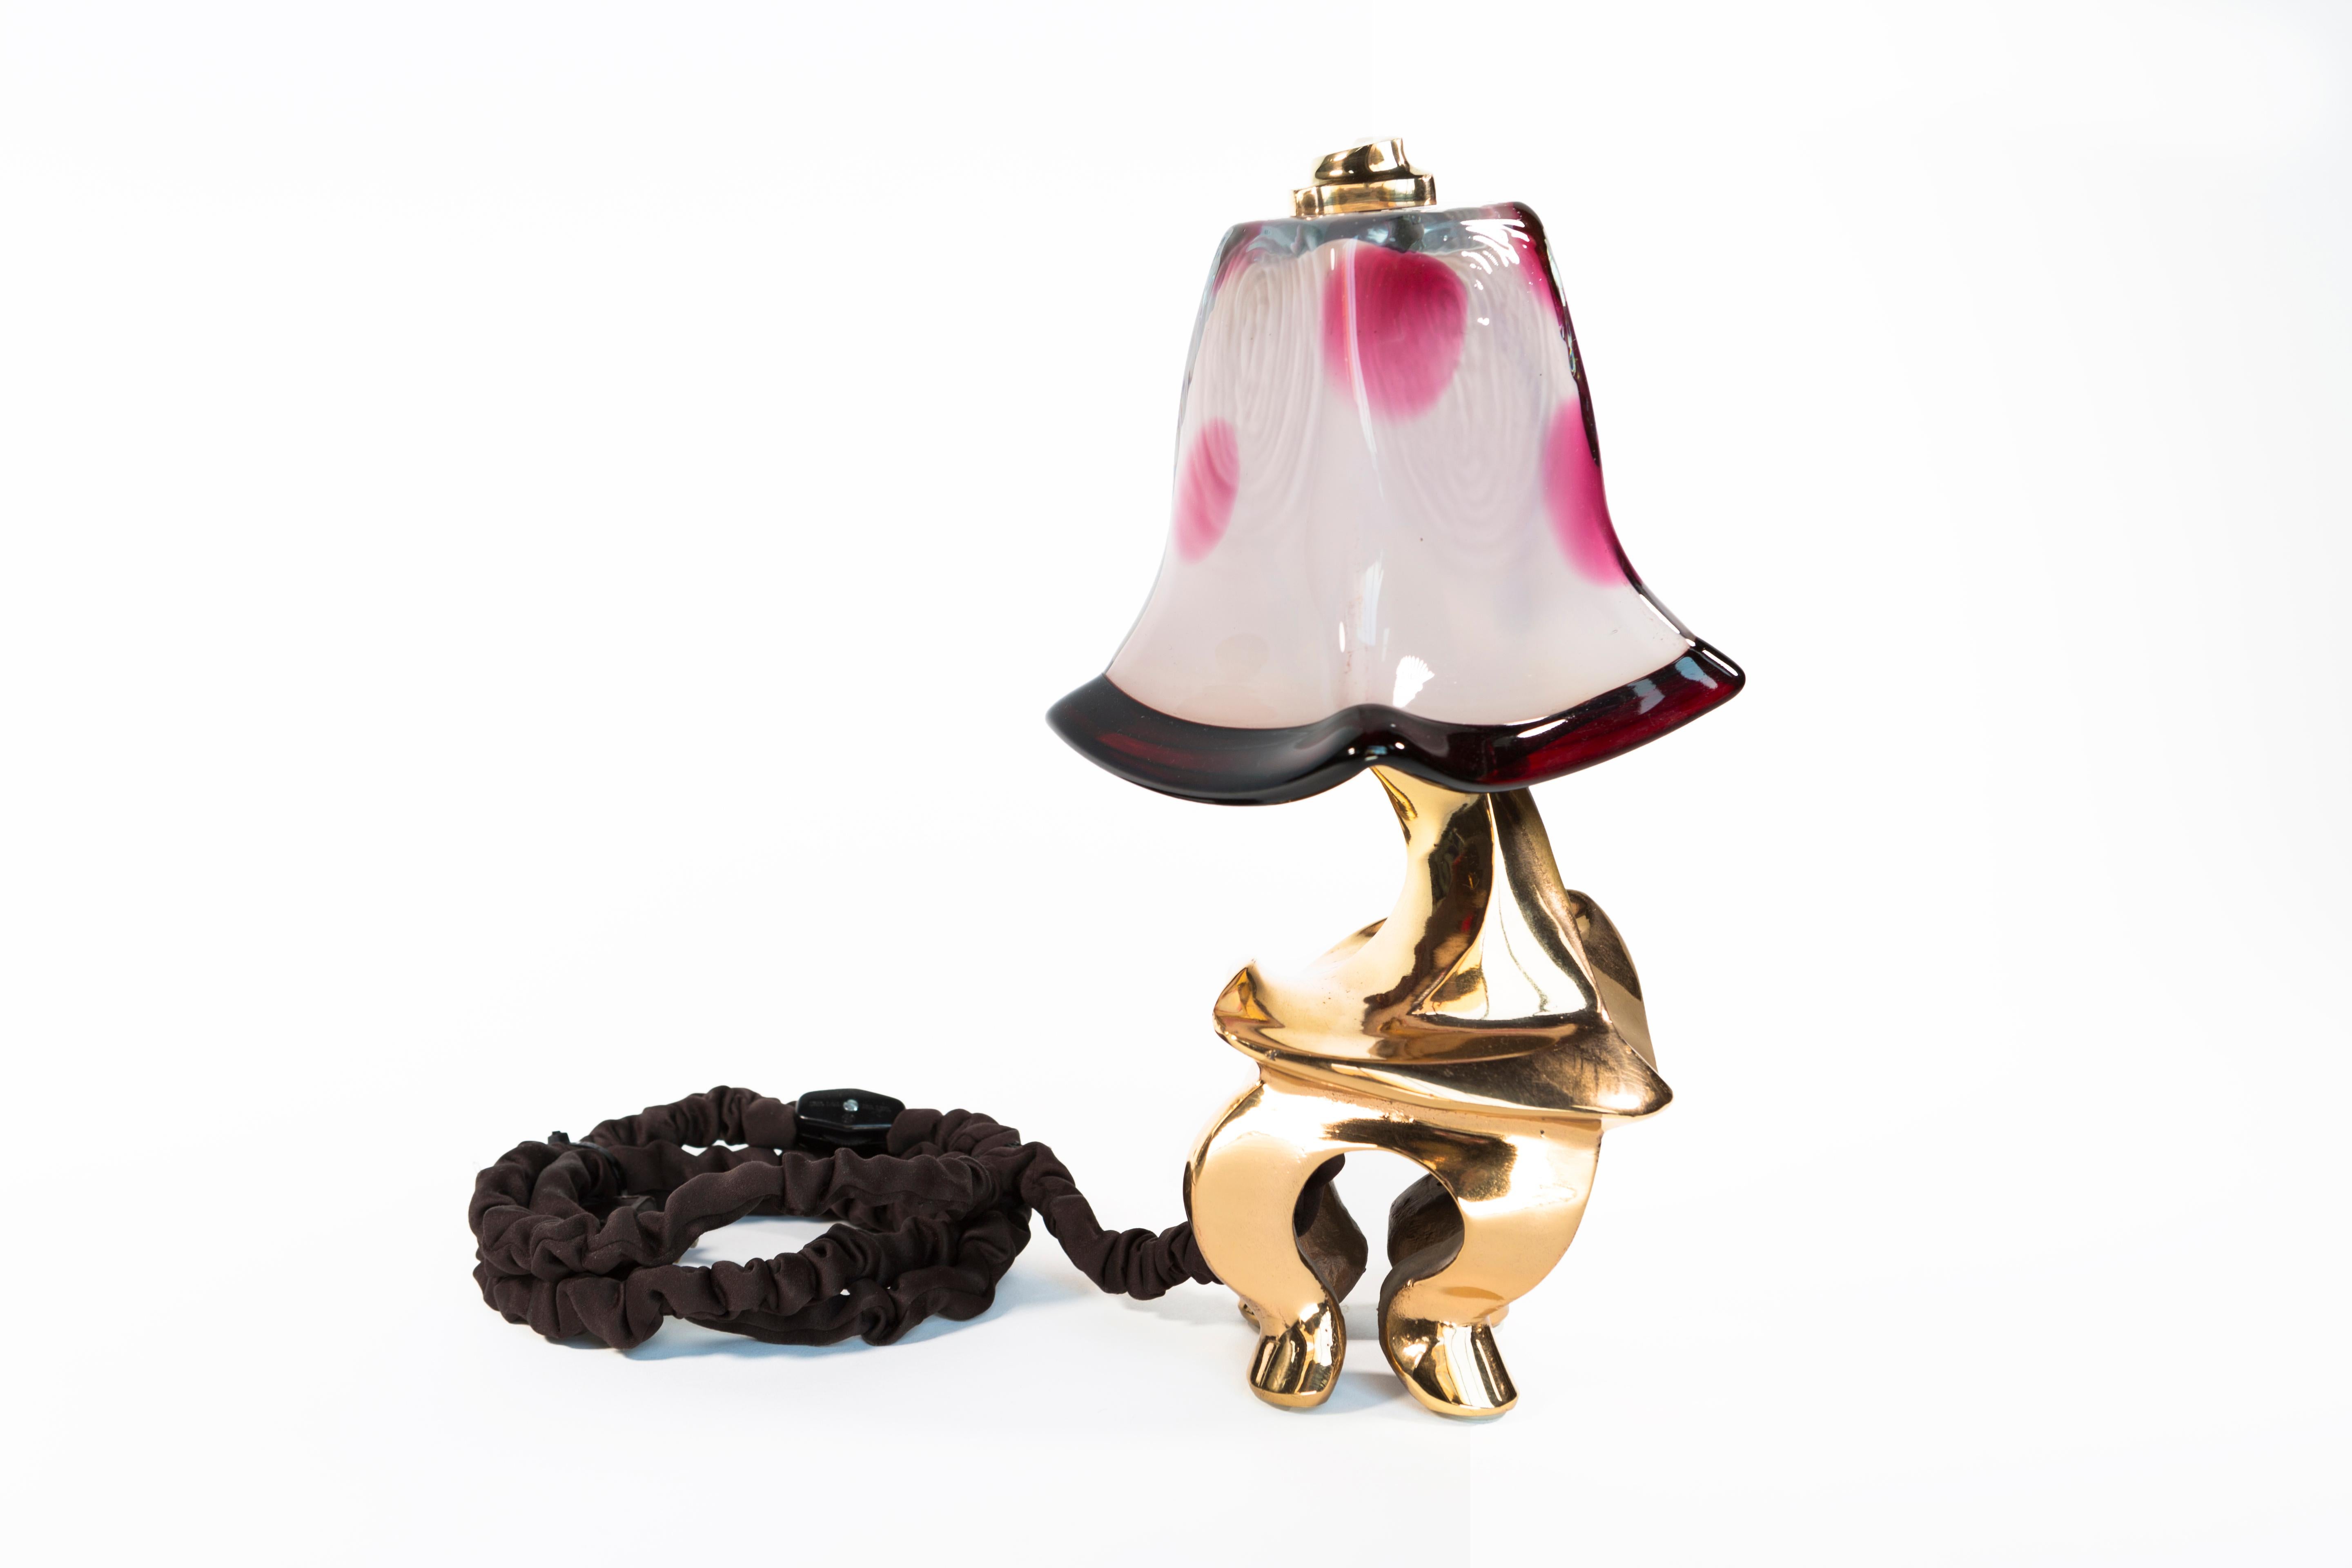 Plié Ballet Table Lamp, investment cast  red bronze, hand-polished, with blown glass. Made in Chicago in 1992 for Iridium Jazz Club, adjacent to Lincoln Center.  Measurements: 6